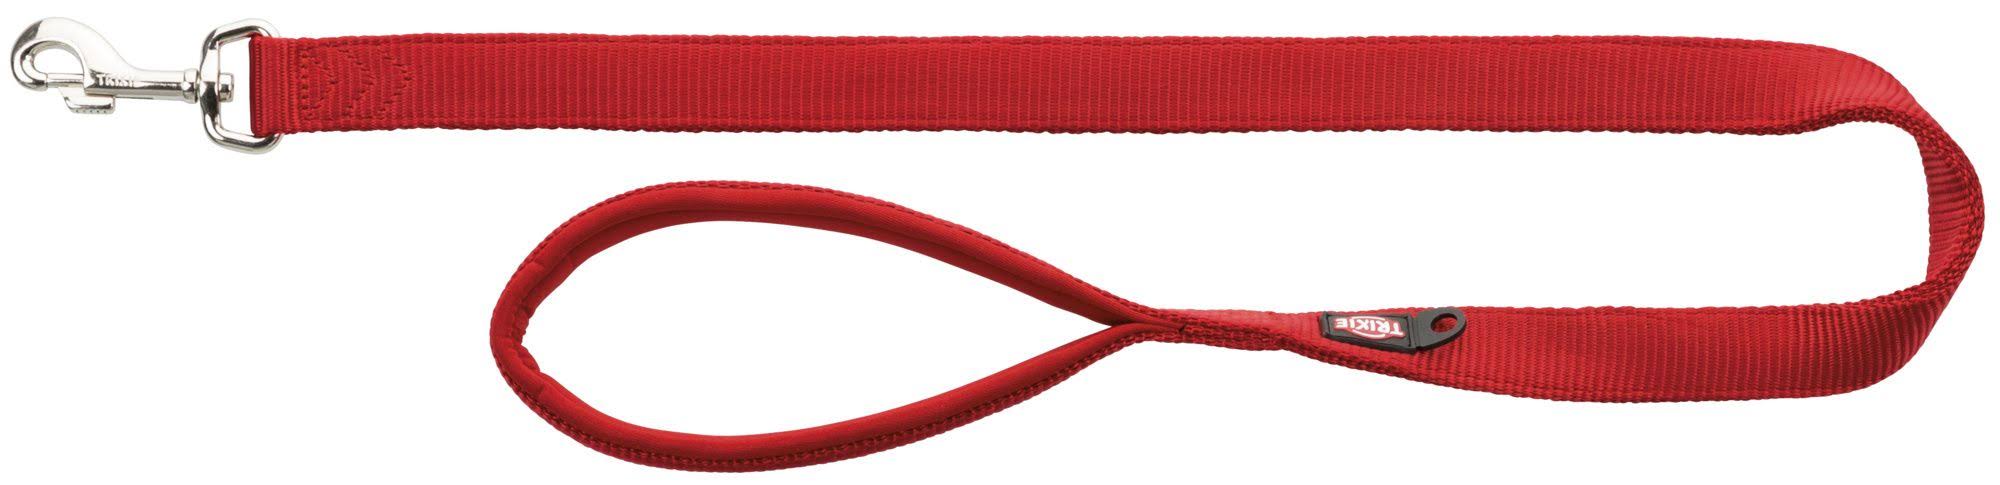 Trixie Premium Leash Extra Long Red - Extra Small